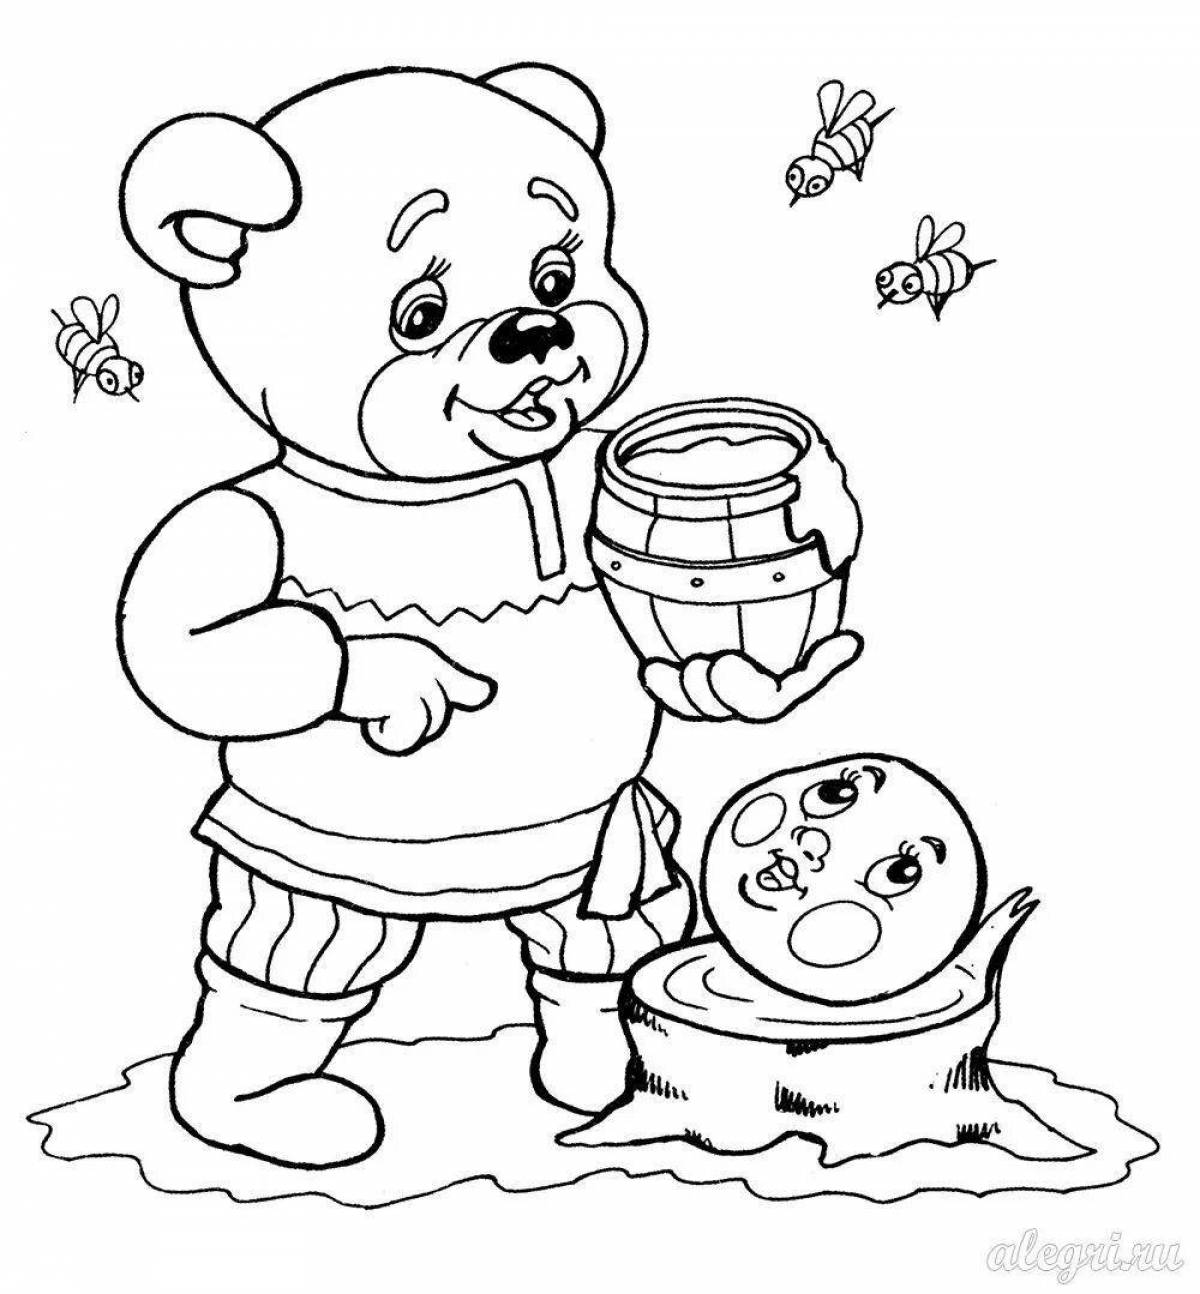 Adorable gingerbread man coloring book for kids